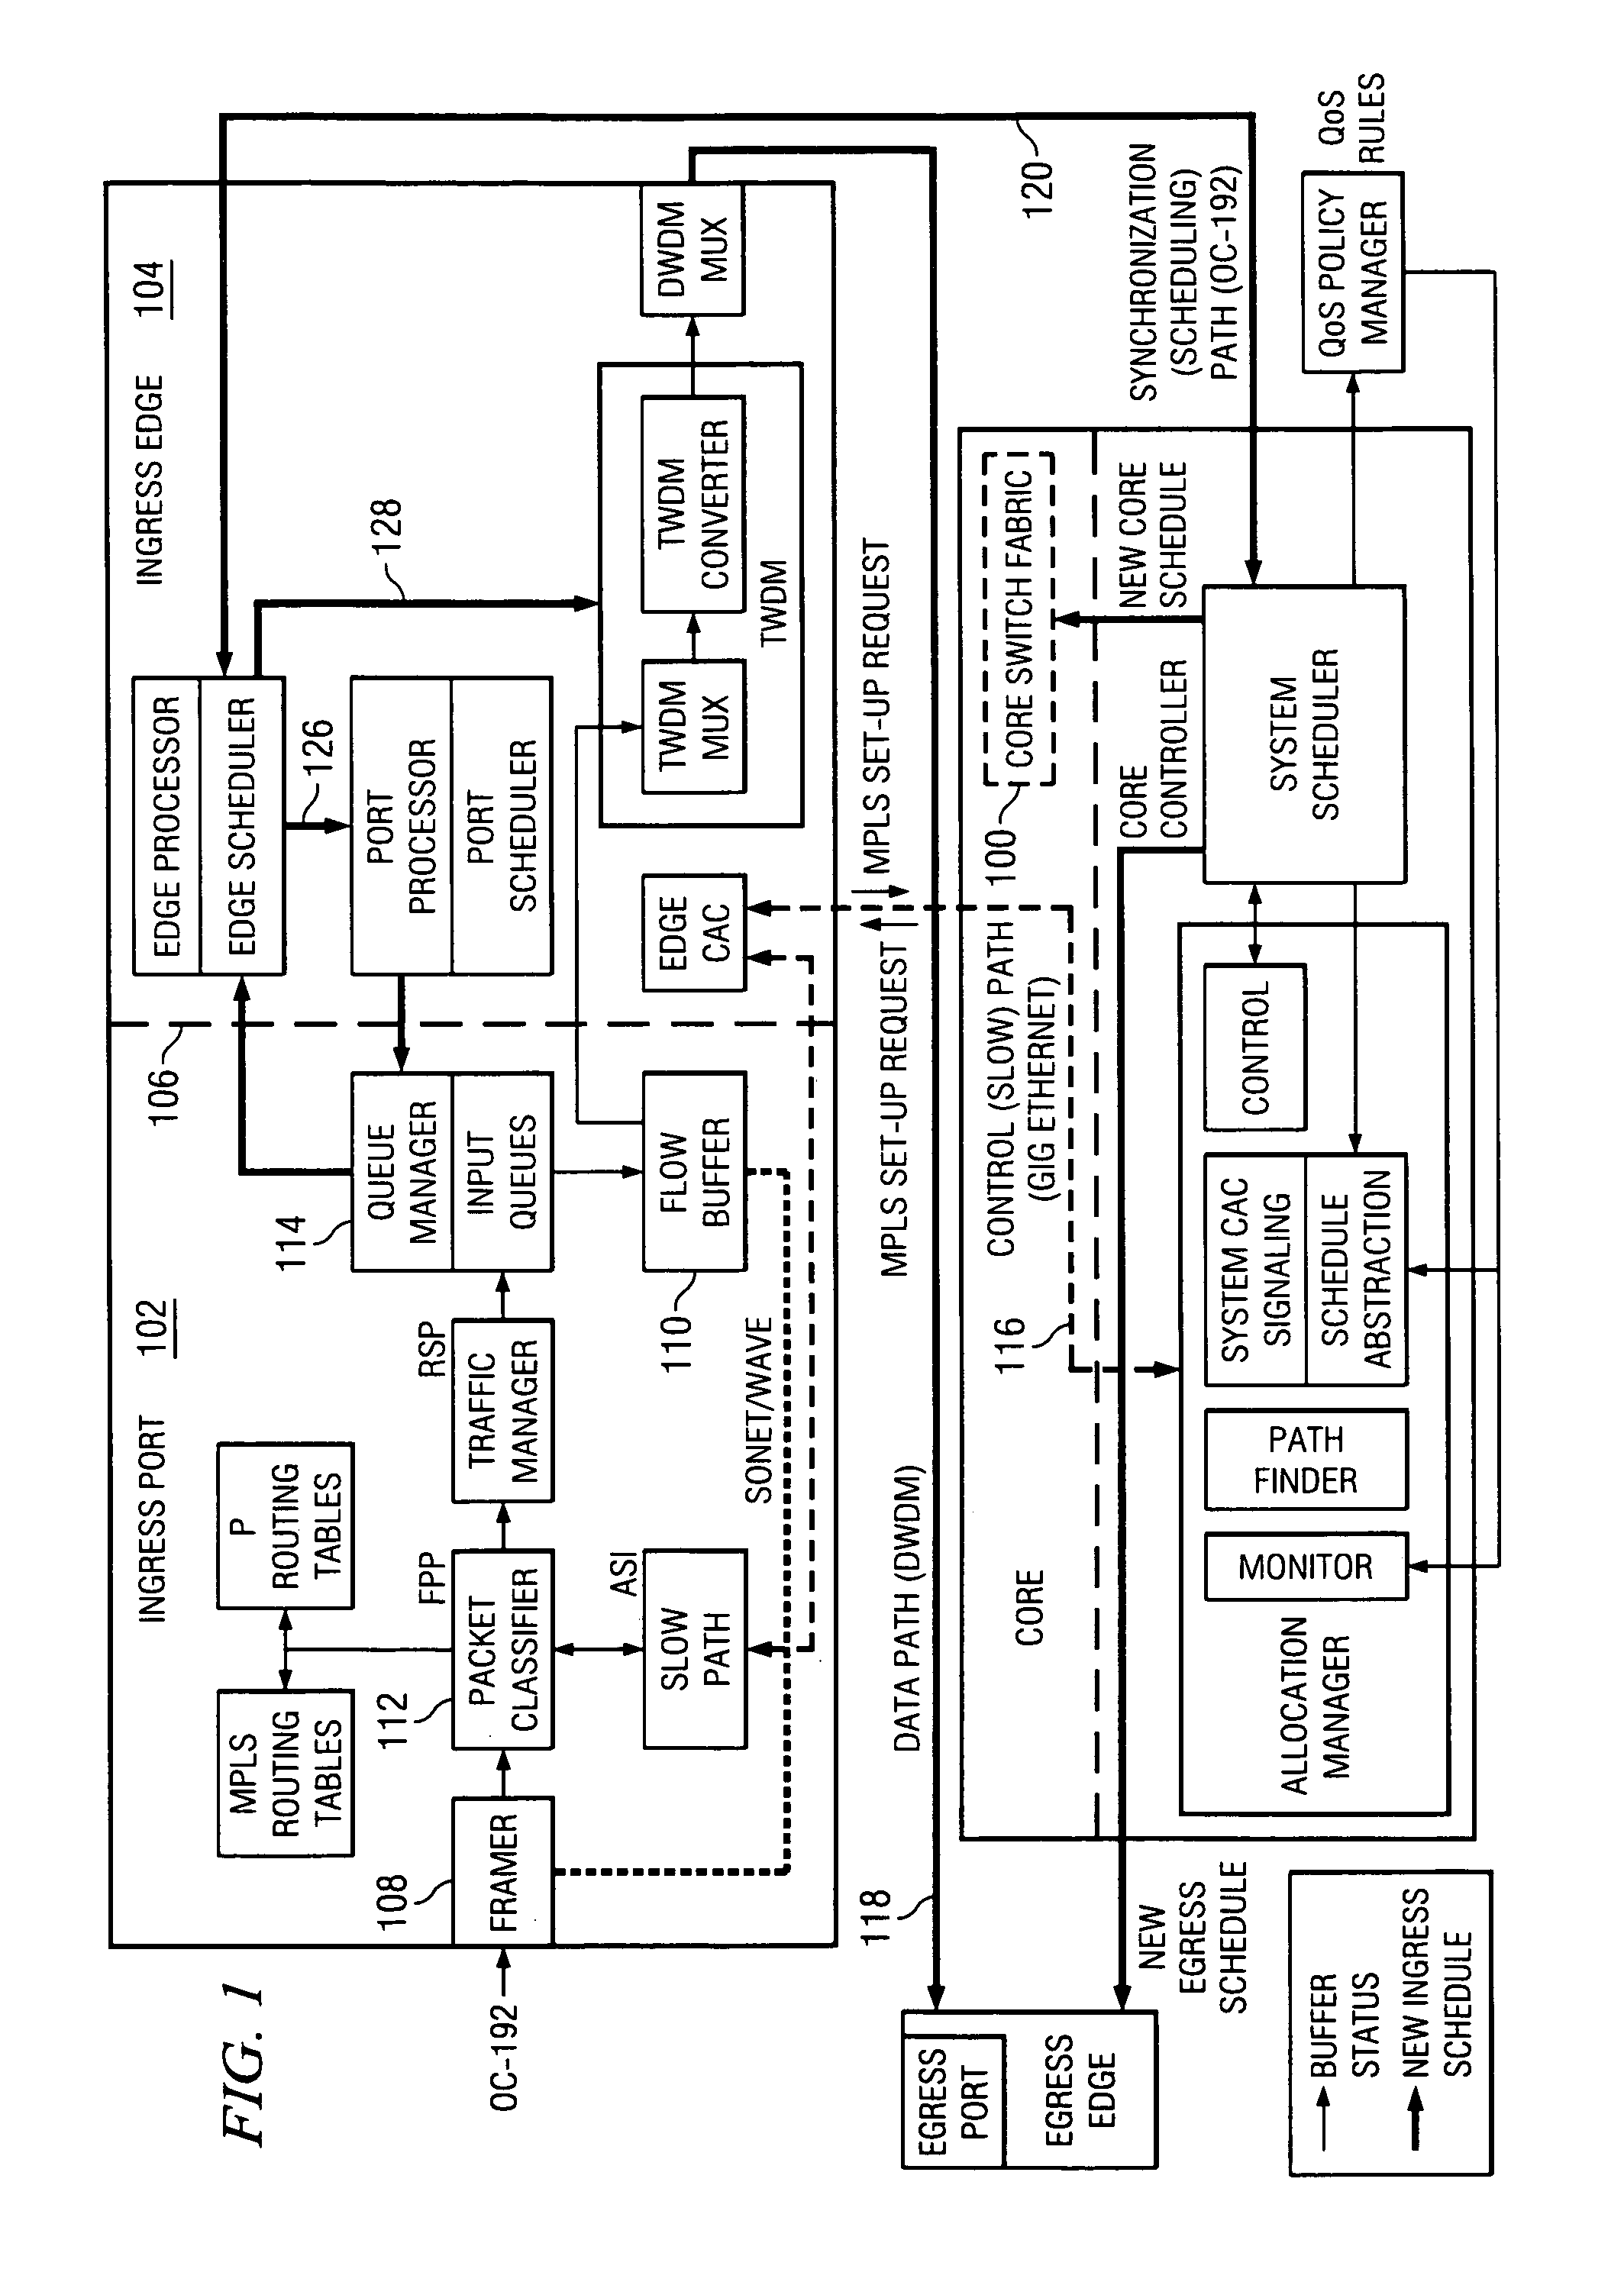 System and method for implementing dynamic scheduling of data in a non-blocking all-optical switching network